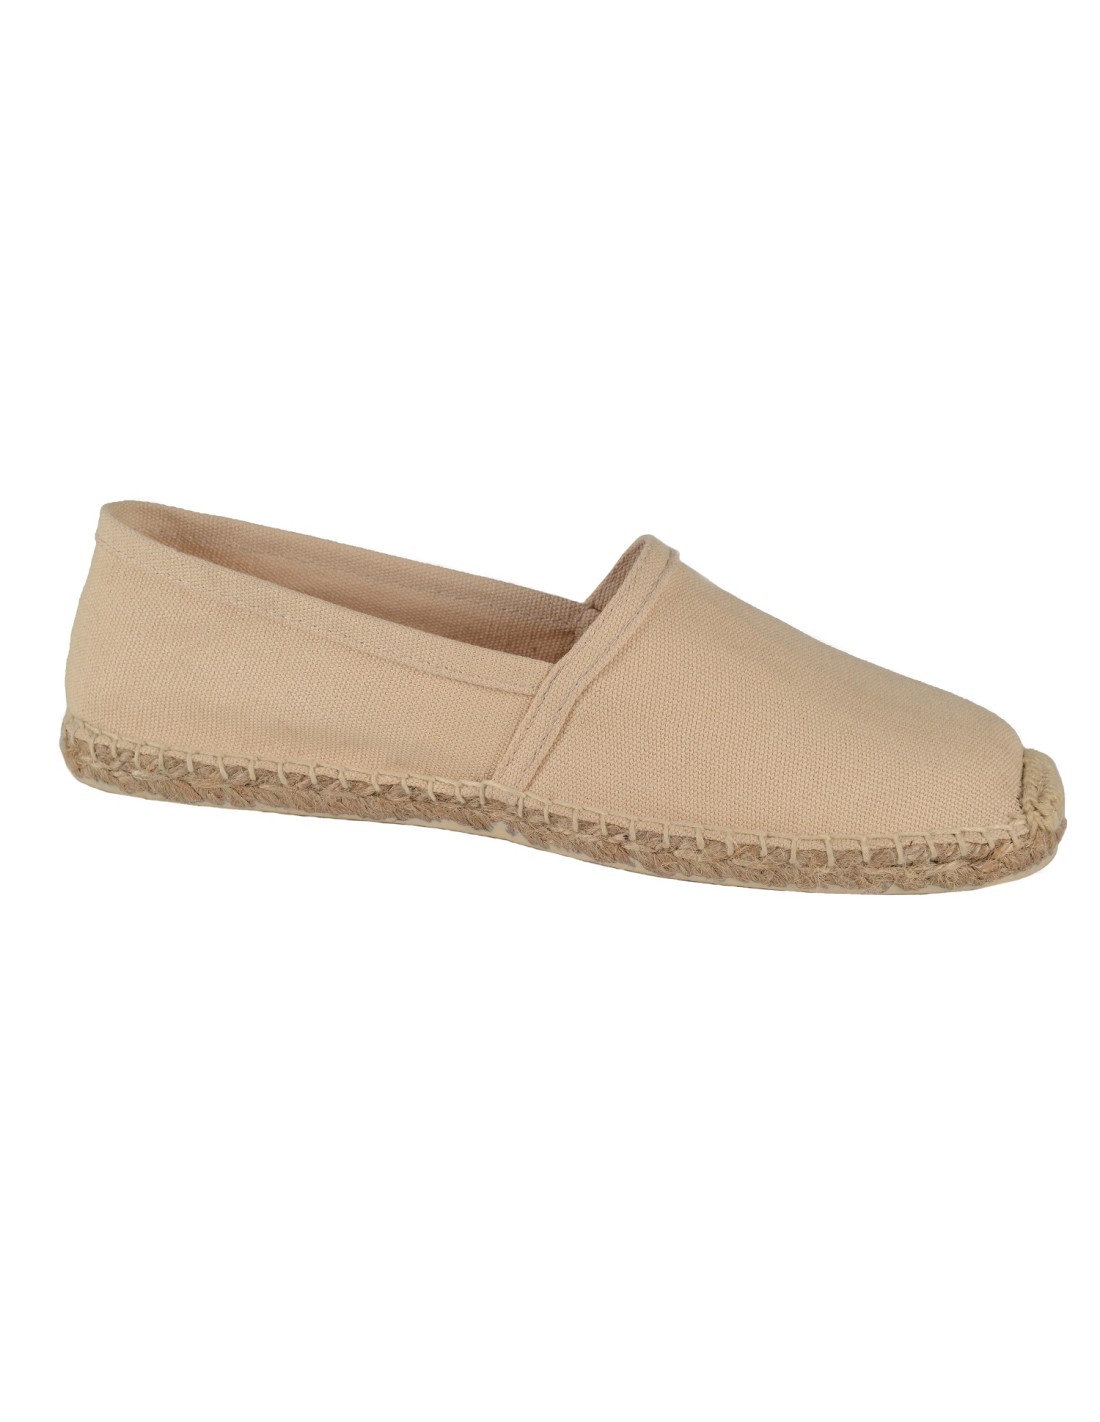 Espadrilles Cheap - in traditional canvas Tailles 36 Coloris ARIMEX Beige